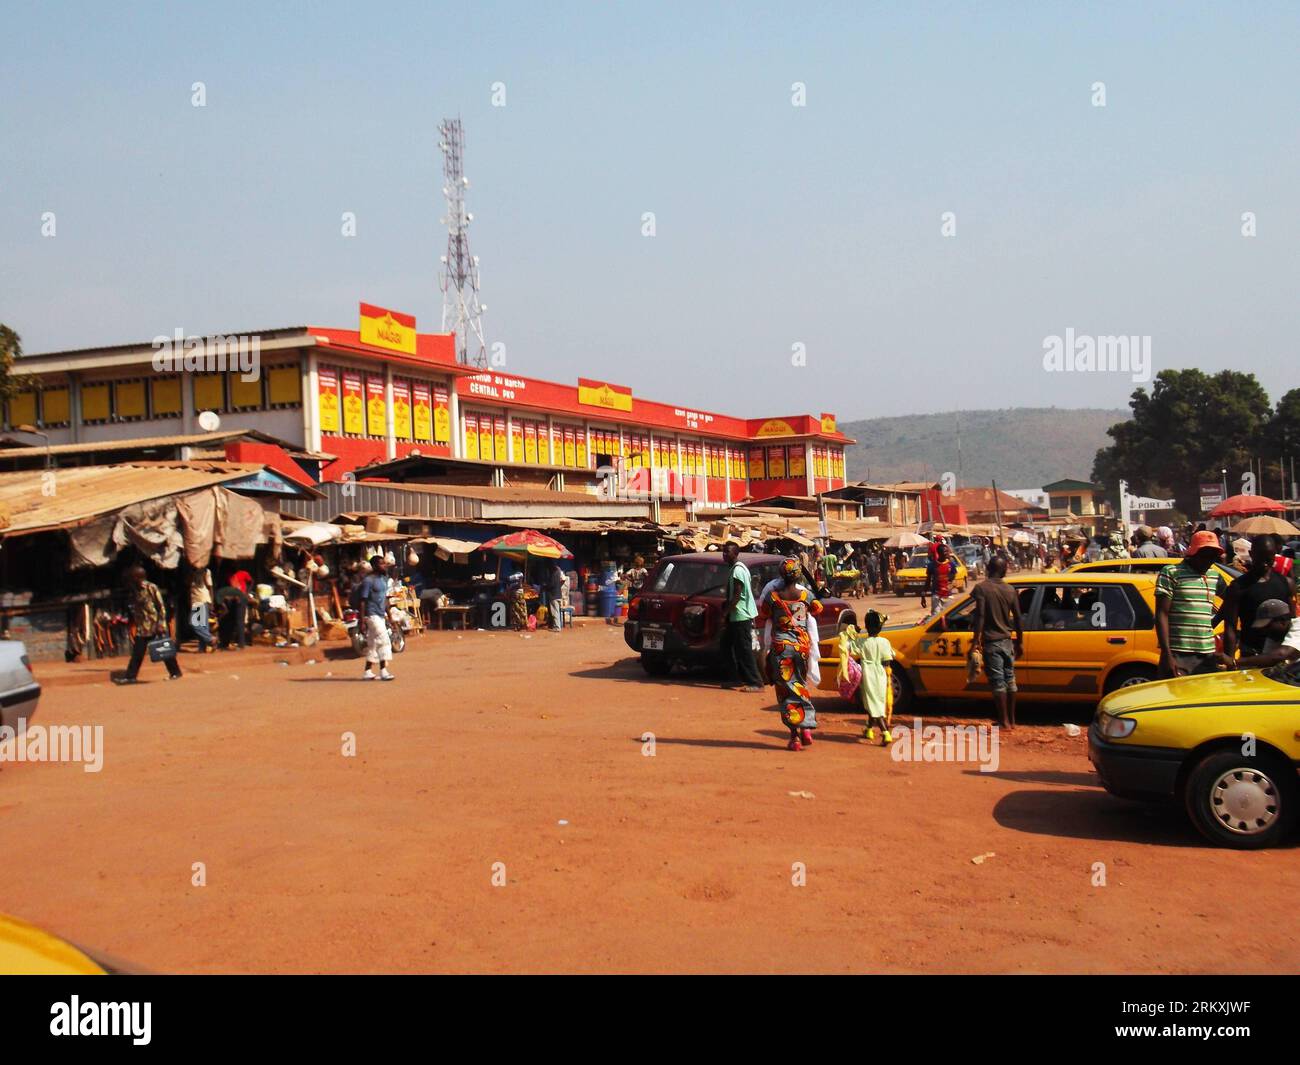 Central African Republic, Bangui Fighter's Market Stock Photo - Alamy